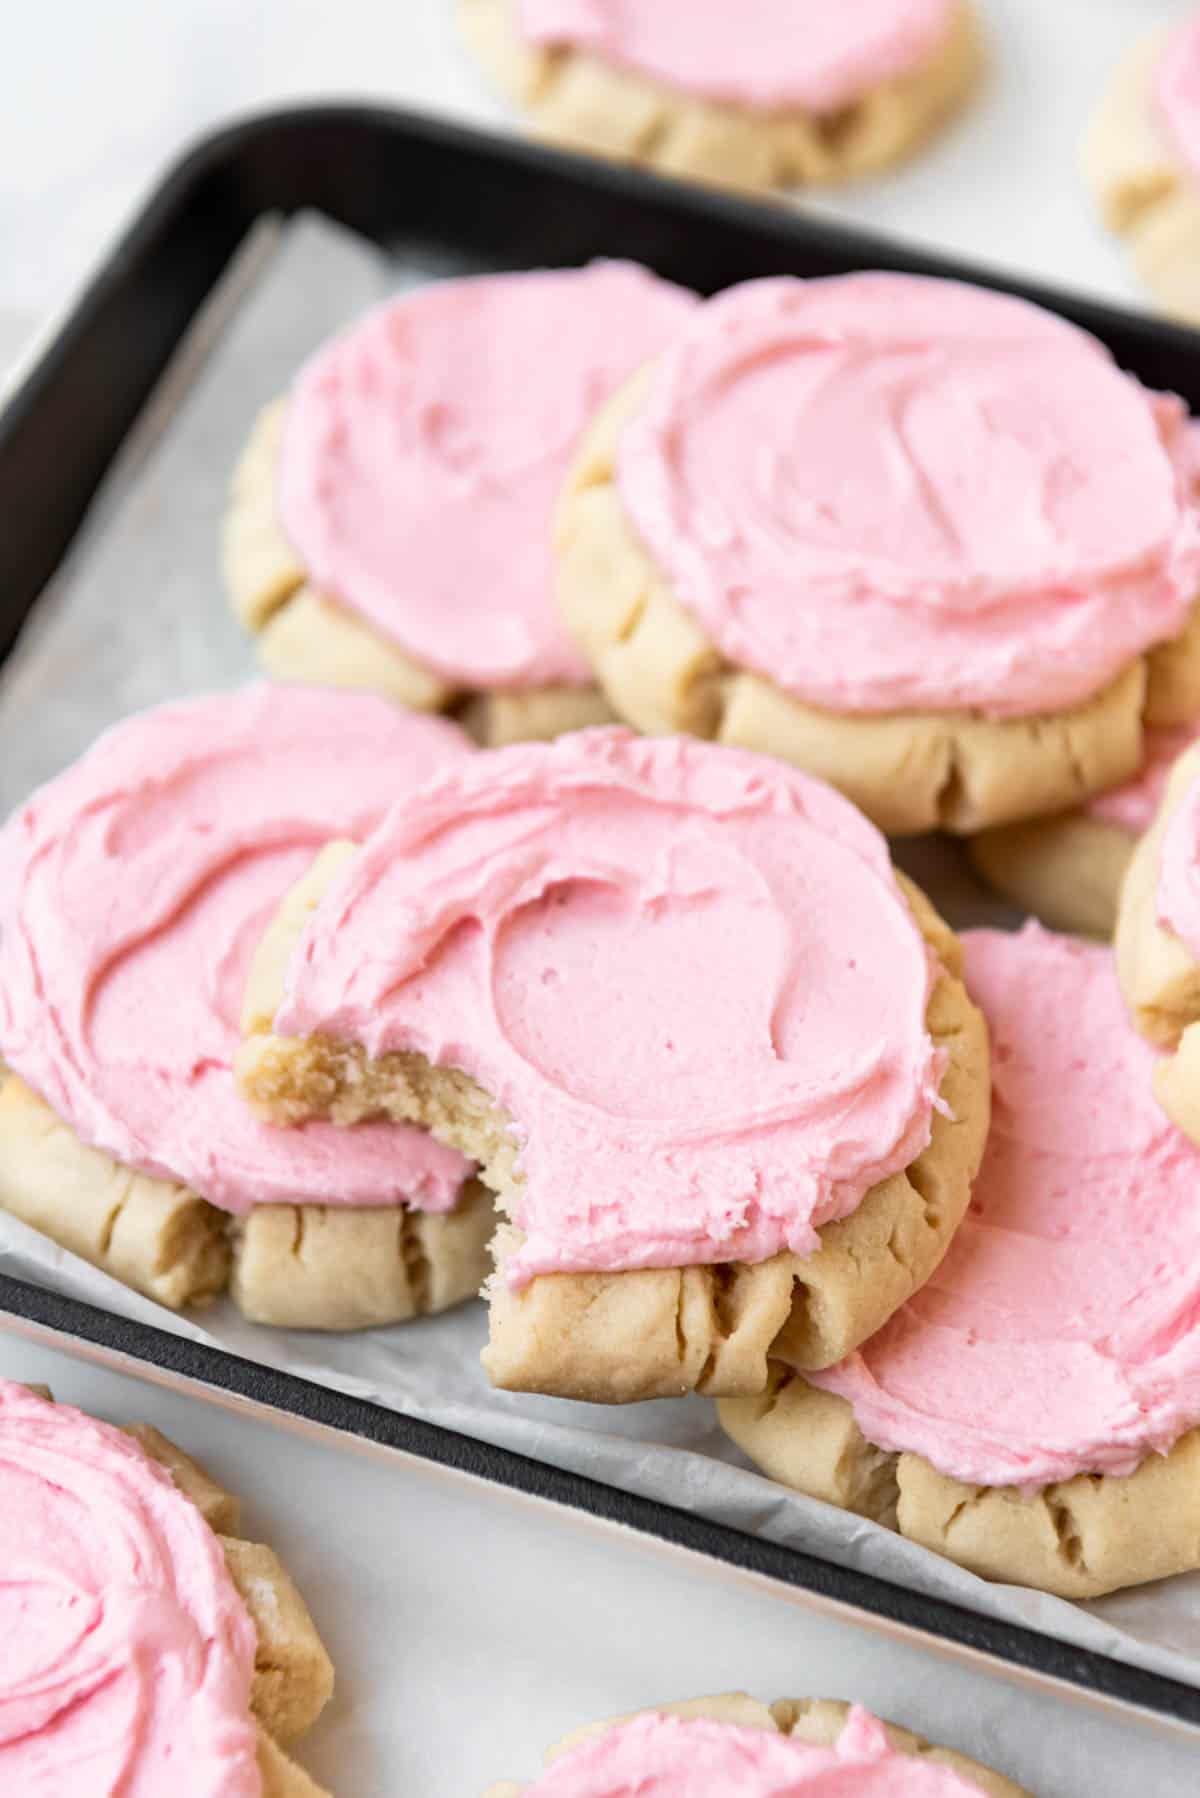 A pink frosted sugar cookie with a bite taken out of it with more sugar cookies on an angled serving plate.